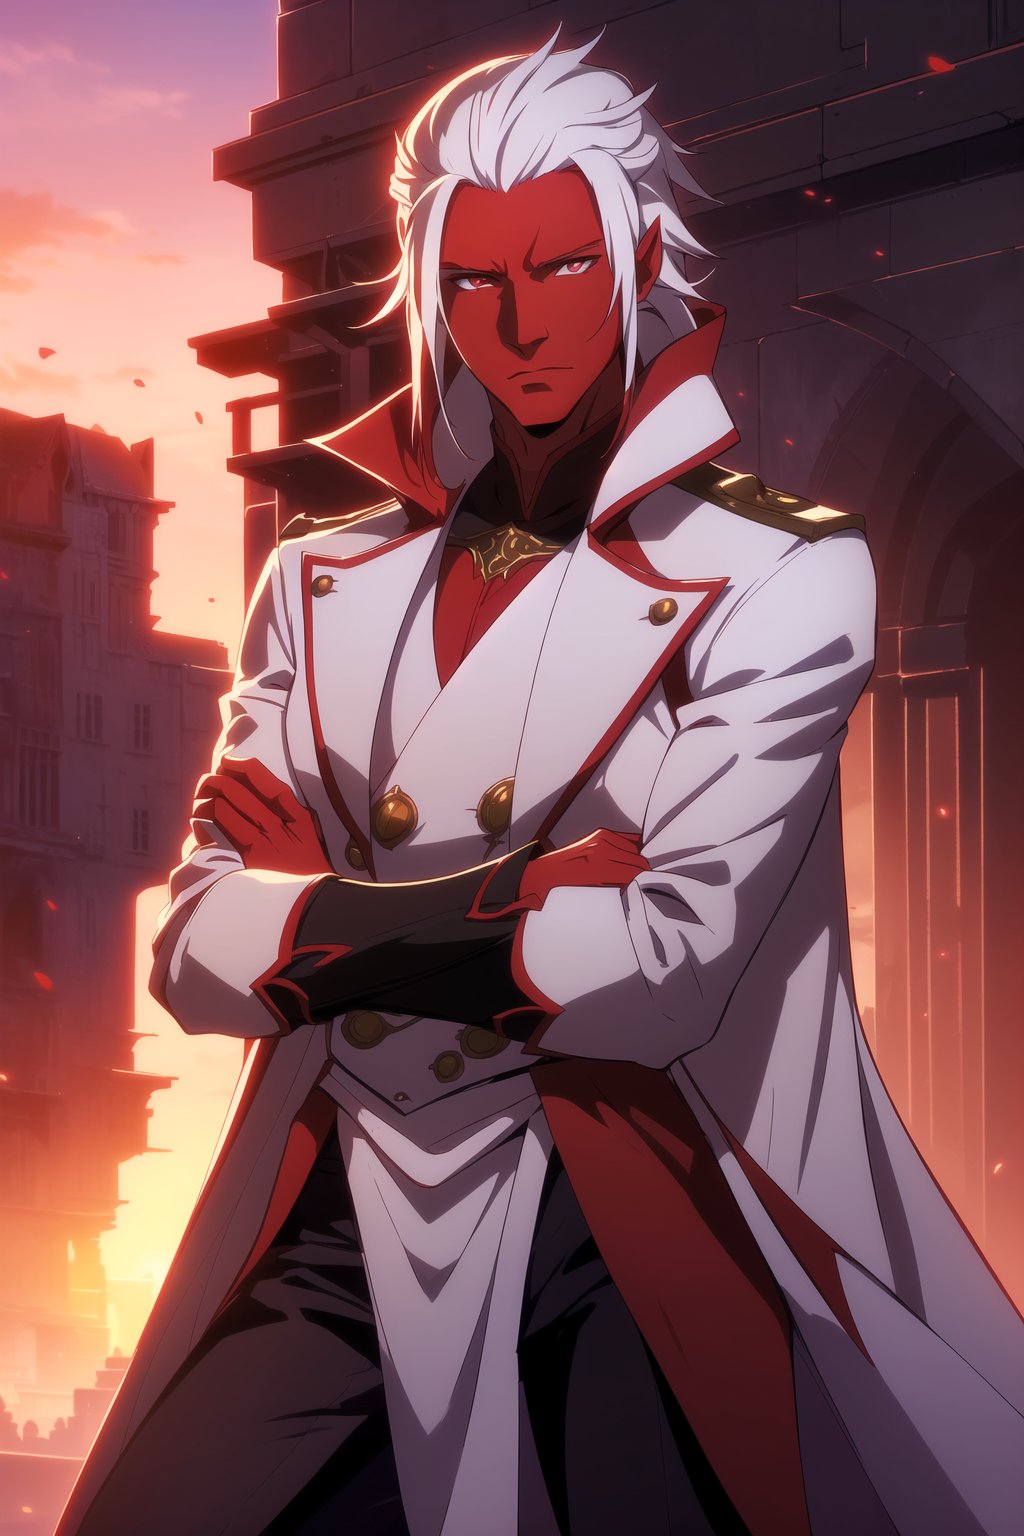 (Masterpiece, Best Quality), (A Handsome 25-Year-Old Male Tiefling Warrior), (Long Unkempt White Hair:1.4), (Bright Red Skin:1.4), (Red Horns), (Crimson Eyes), (Wearing White Long Coat and Black Long Pants:1.6), (City Road at Evening with Sunset:1.4), (Crossed Arms Pose:1.4), Centered, (Half Body Shot:1.6), (From Front Shot:1.4), Insane Details, Intricate Face Detail, Intricate Hand Details, Cinematic Shot and Lighting, Realistic and Vibrant Colors, Sharp Focus, Ultra Detailed, Realistic Images, Depth of Field, Incredibly Realistic Environment and Scene, Master Composition and Cinematography,castlevania style,tiefling